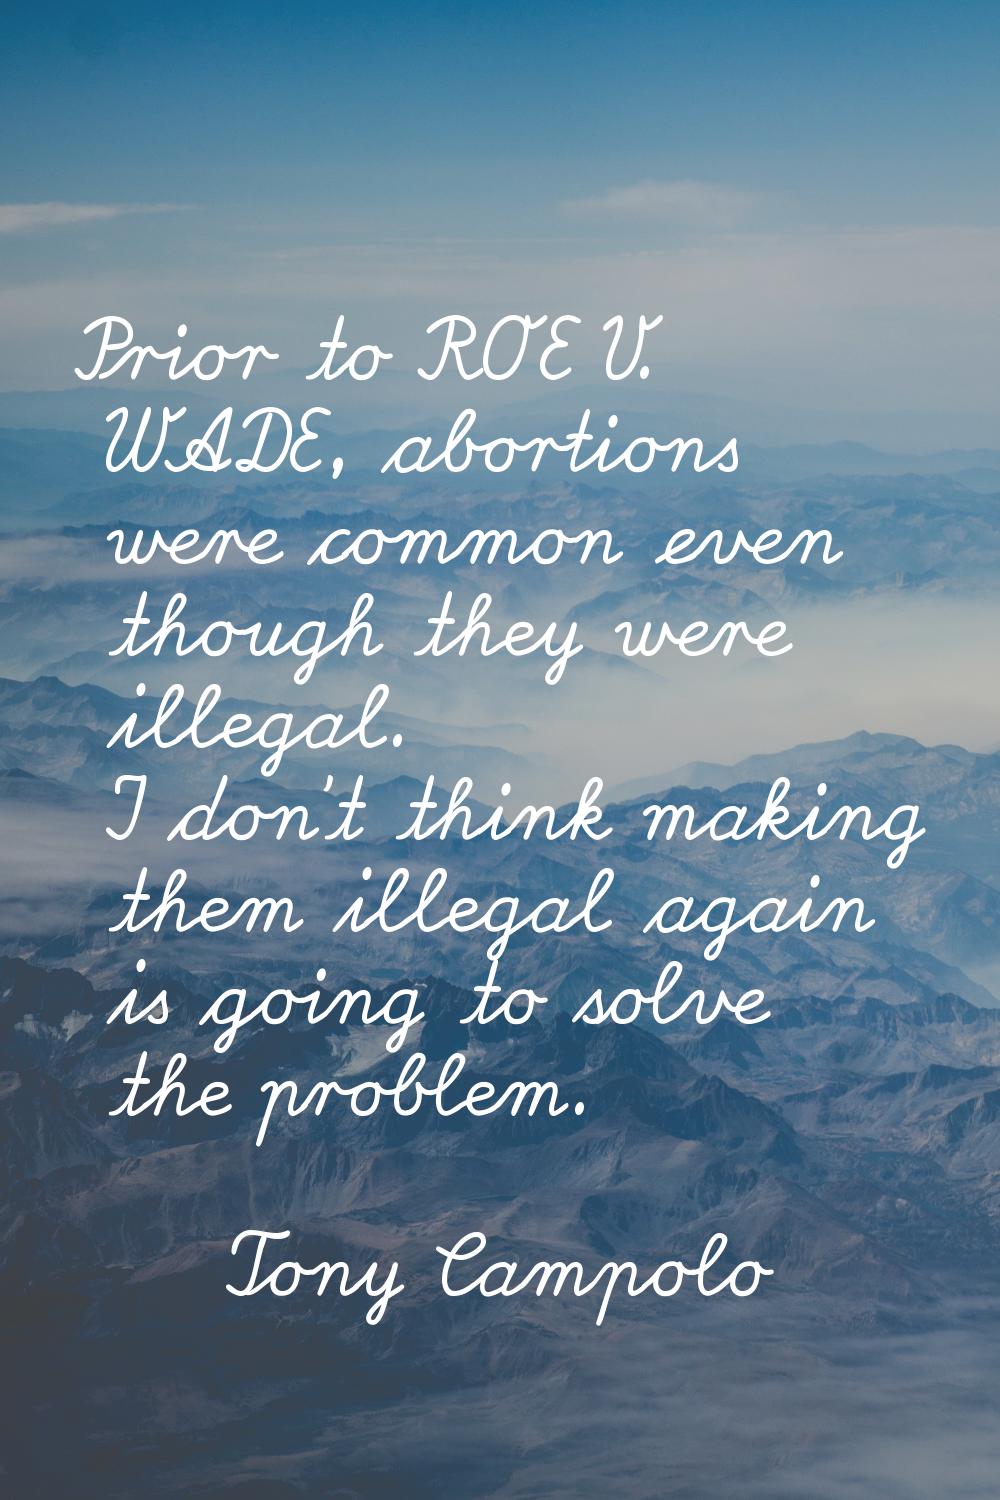 Prior to ROE V. WADE, abortions were common even though they were illegal. I don't think making the